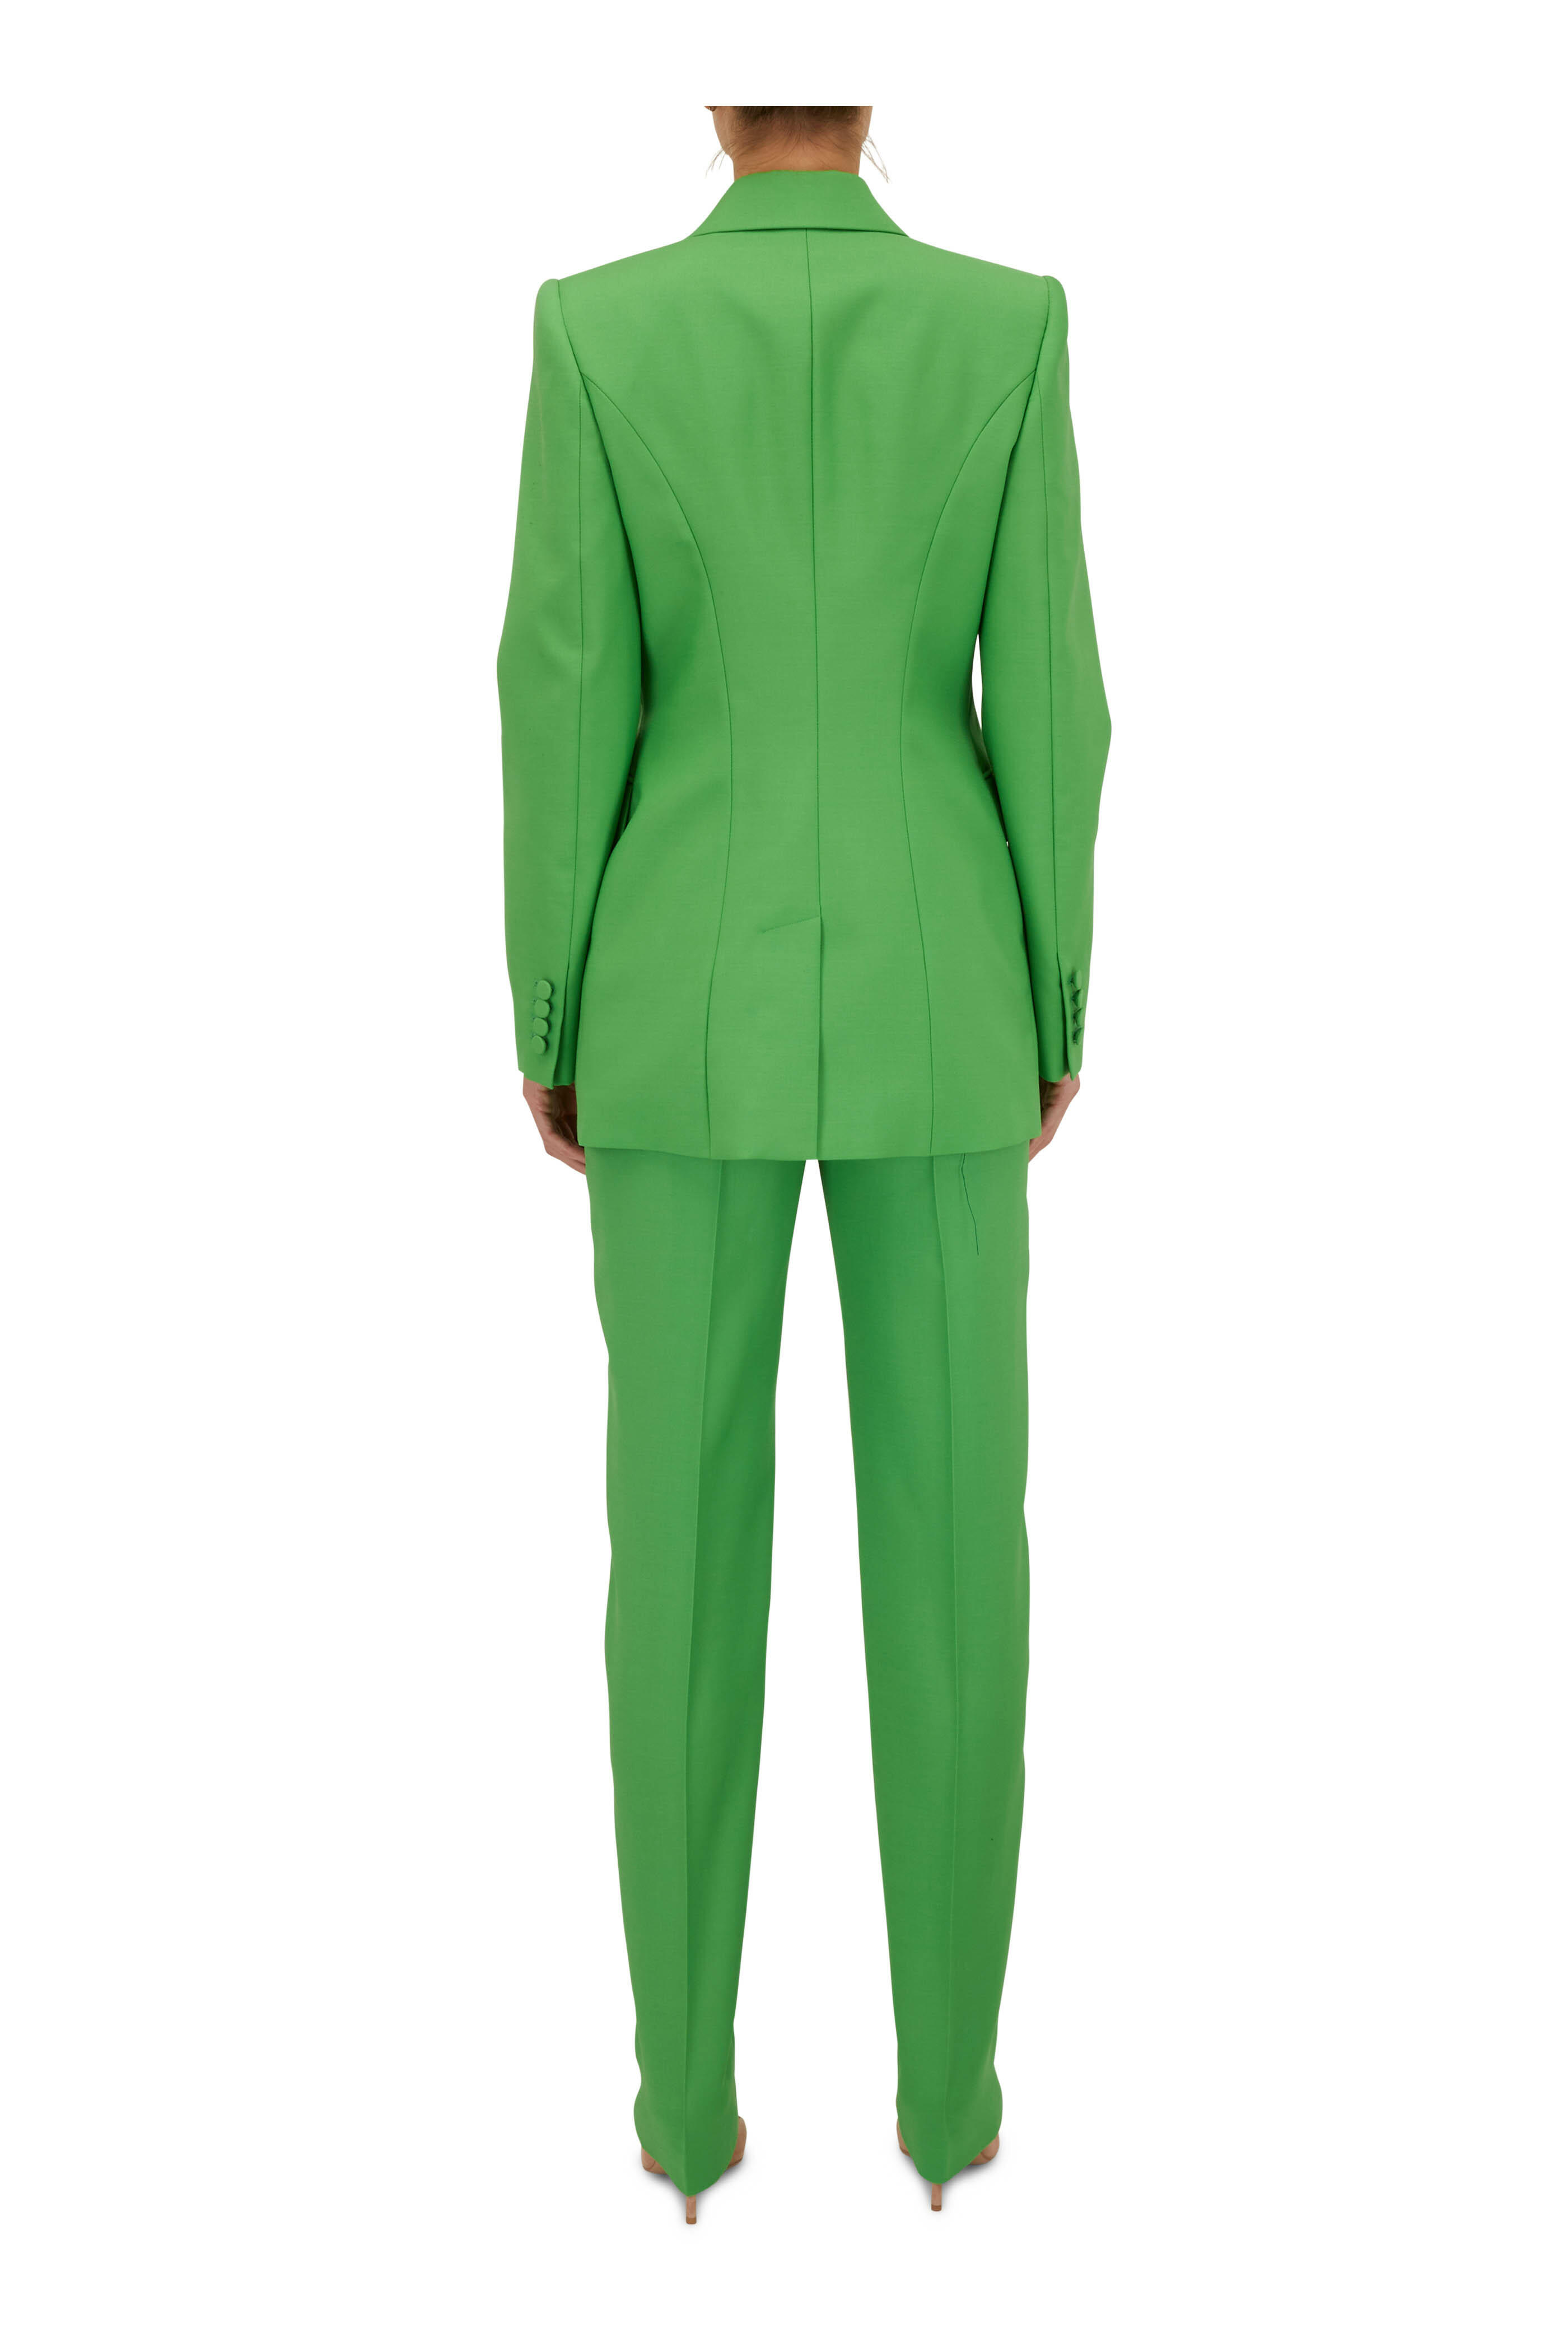 Alexander McQueen - Bright Green Fitted Double-Breasted Jacket